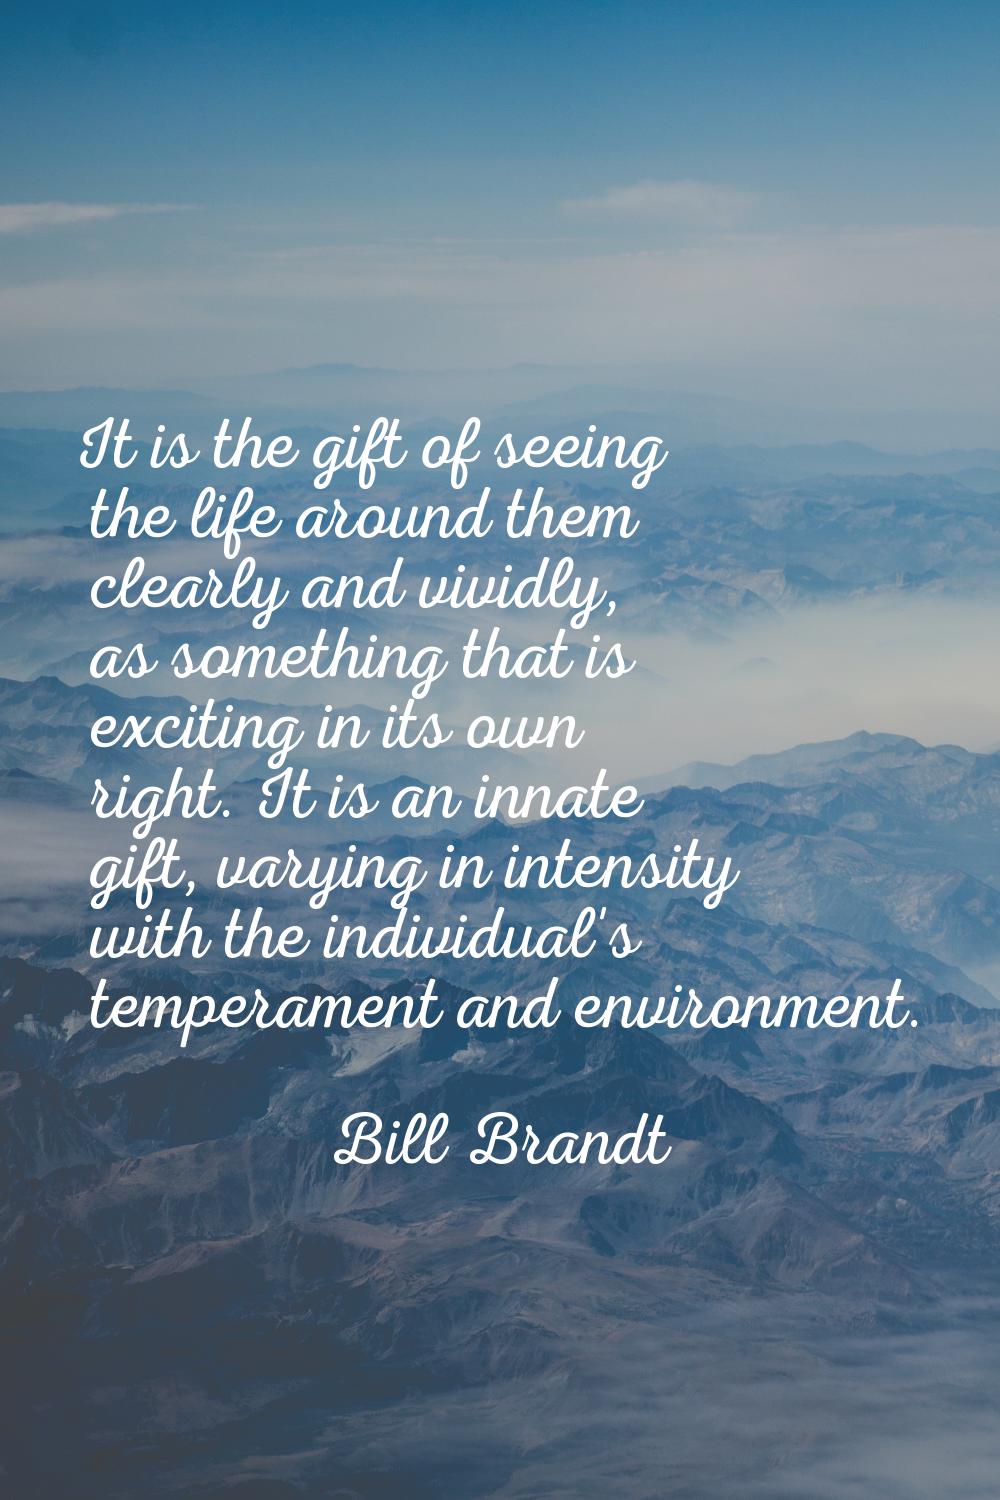 It is the gift of seeing the life around them clearly and vividly, as something that is exciting in